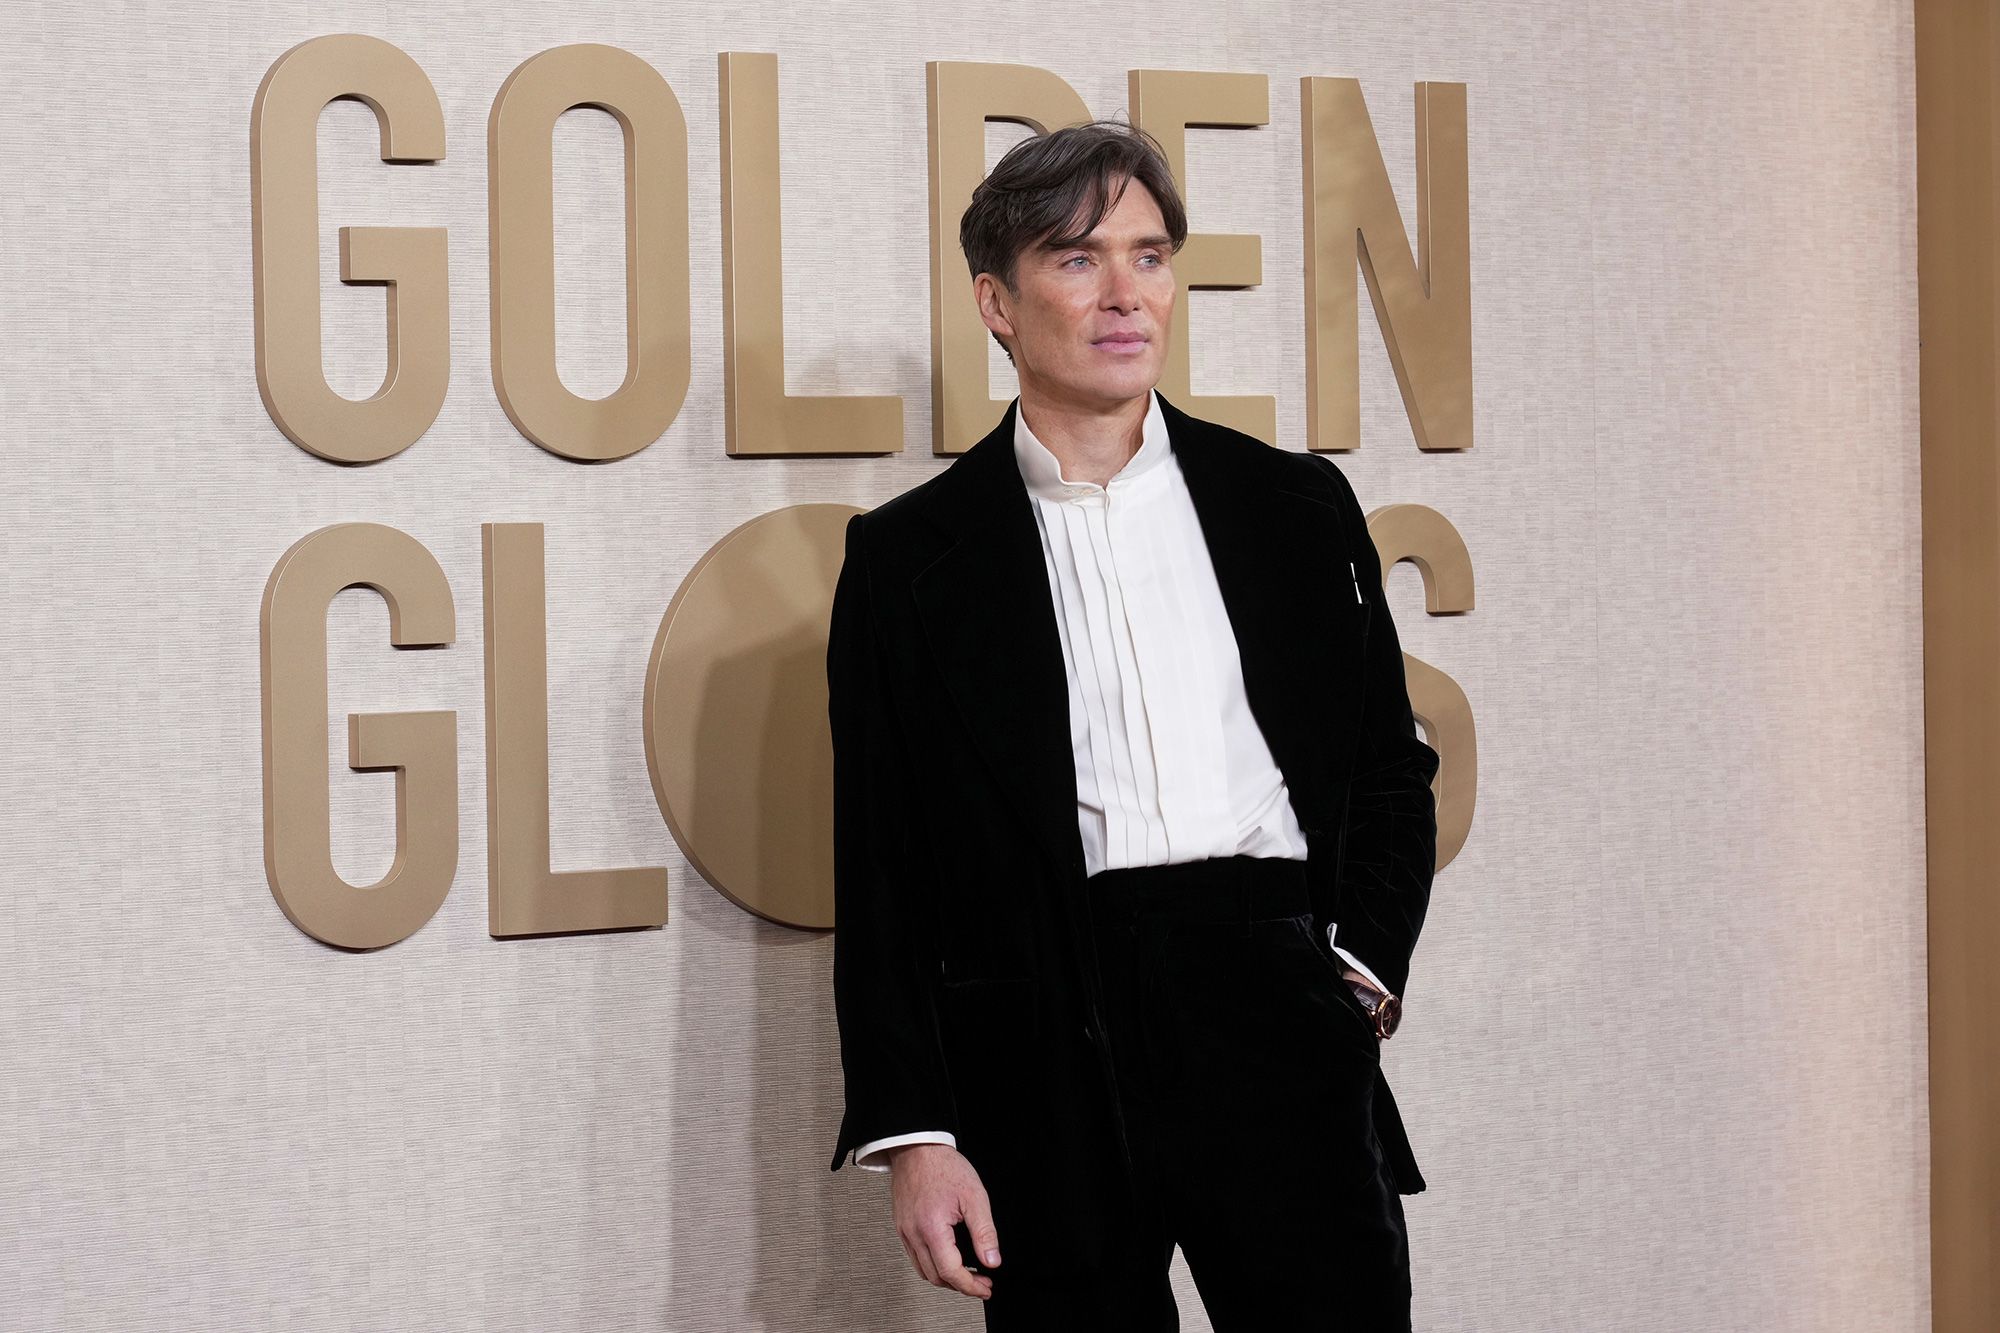 Cillian Murphy, who went on to win a Golden Globe for his performance in “Oppenheimer,” wore a classic black Saint Laurent suit with a white shirt and no tie.